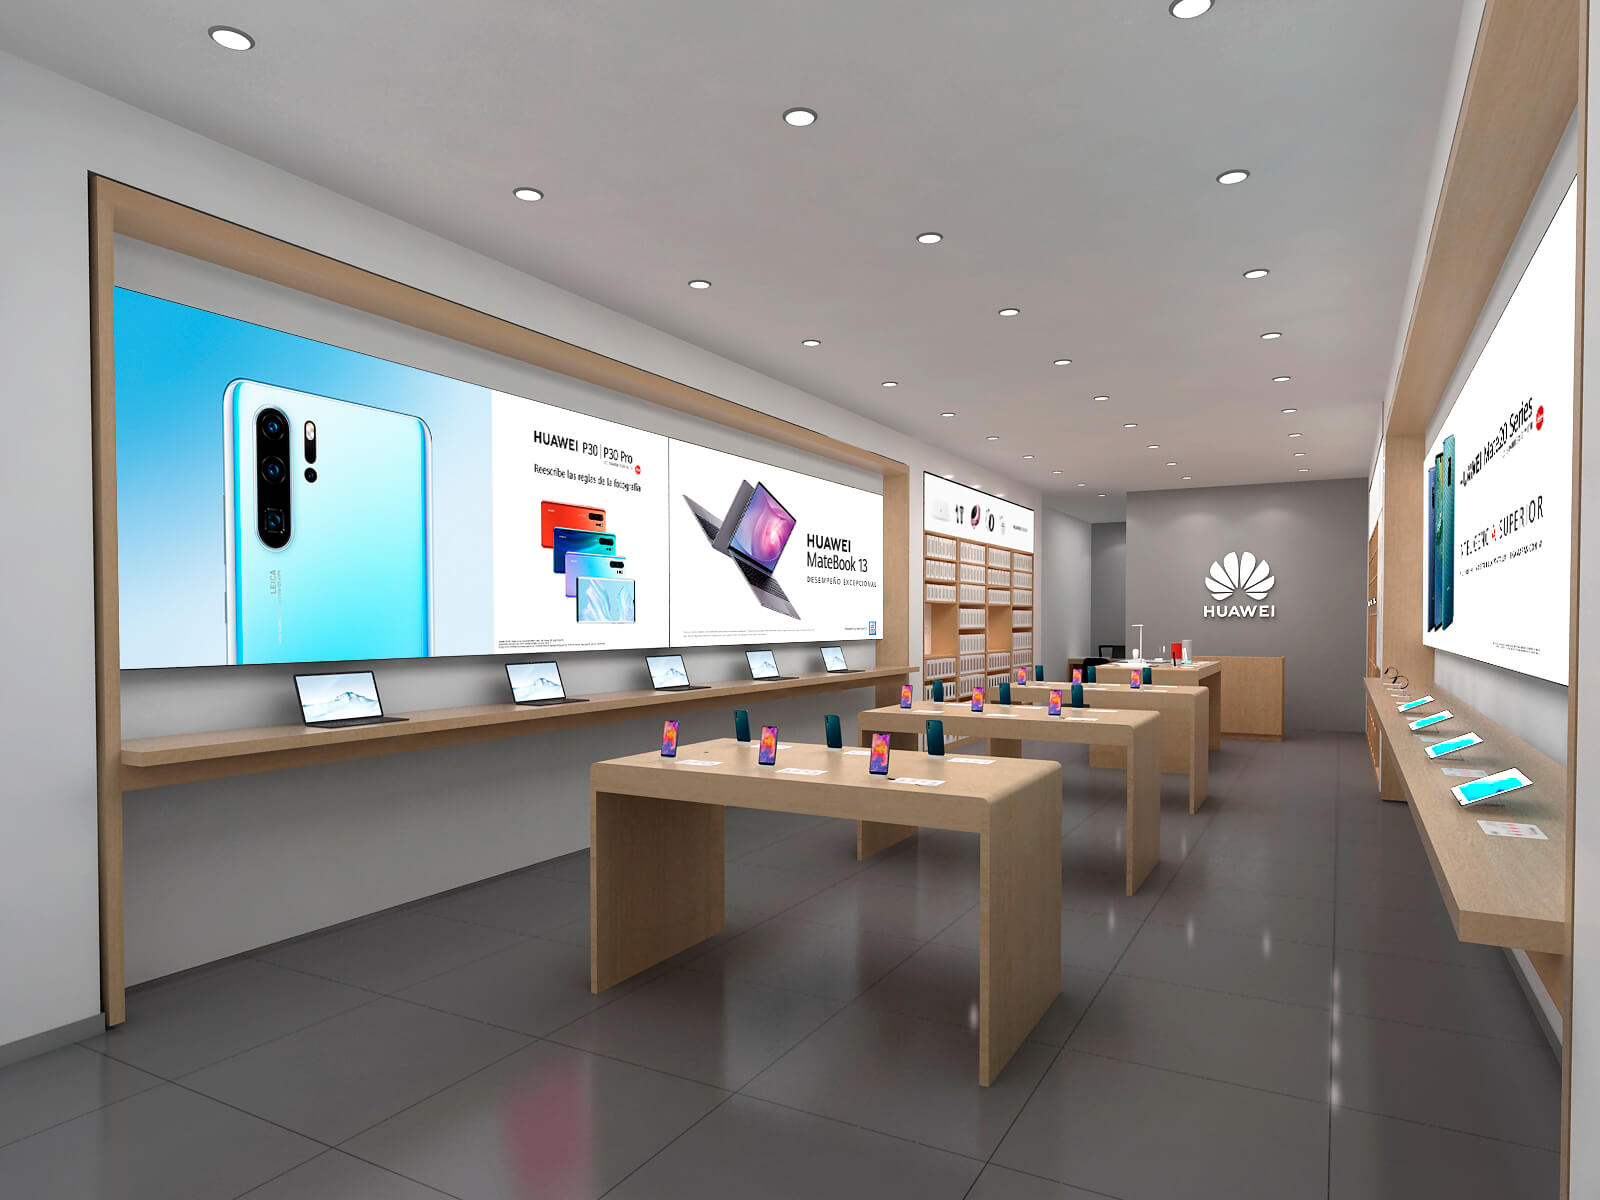 Huawei Experience Store